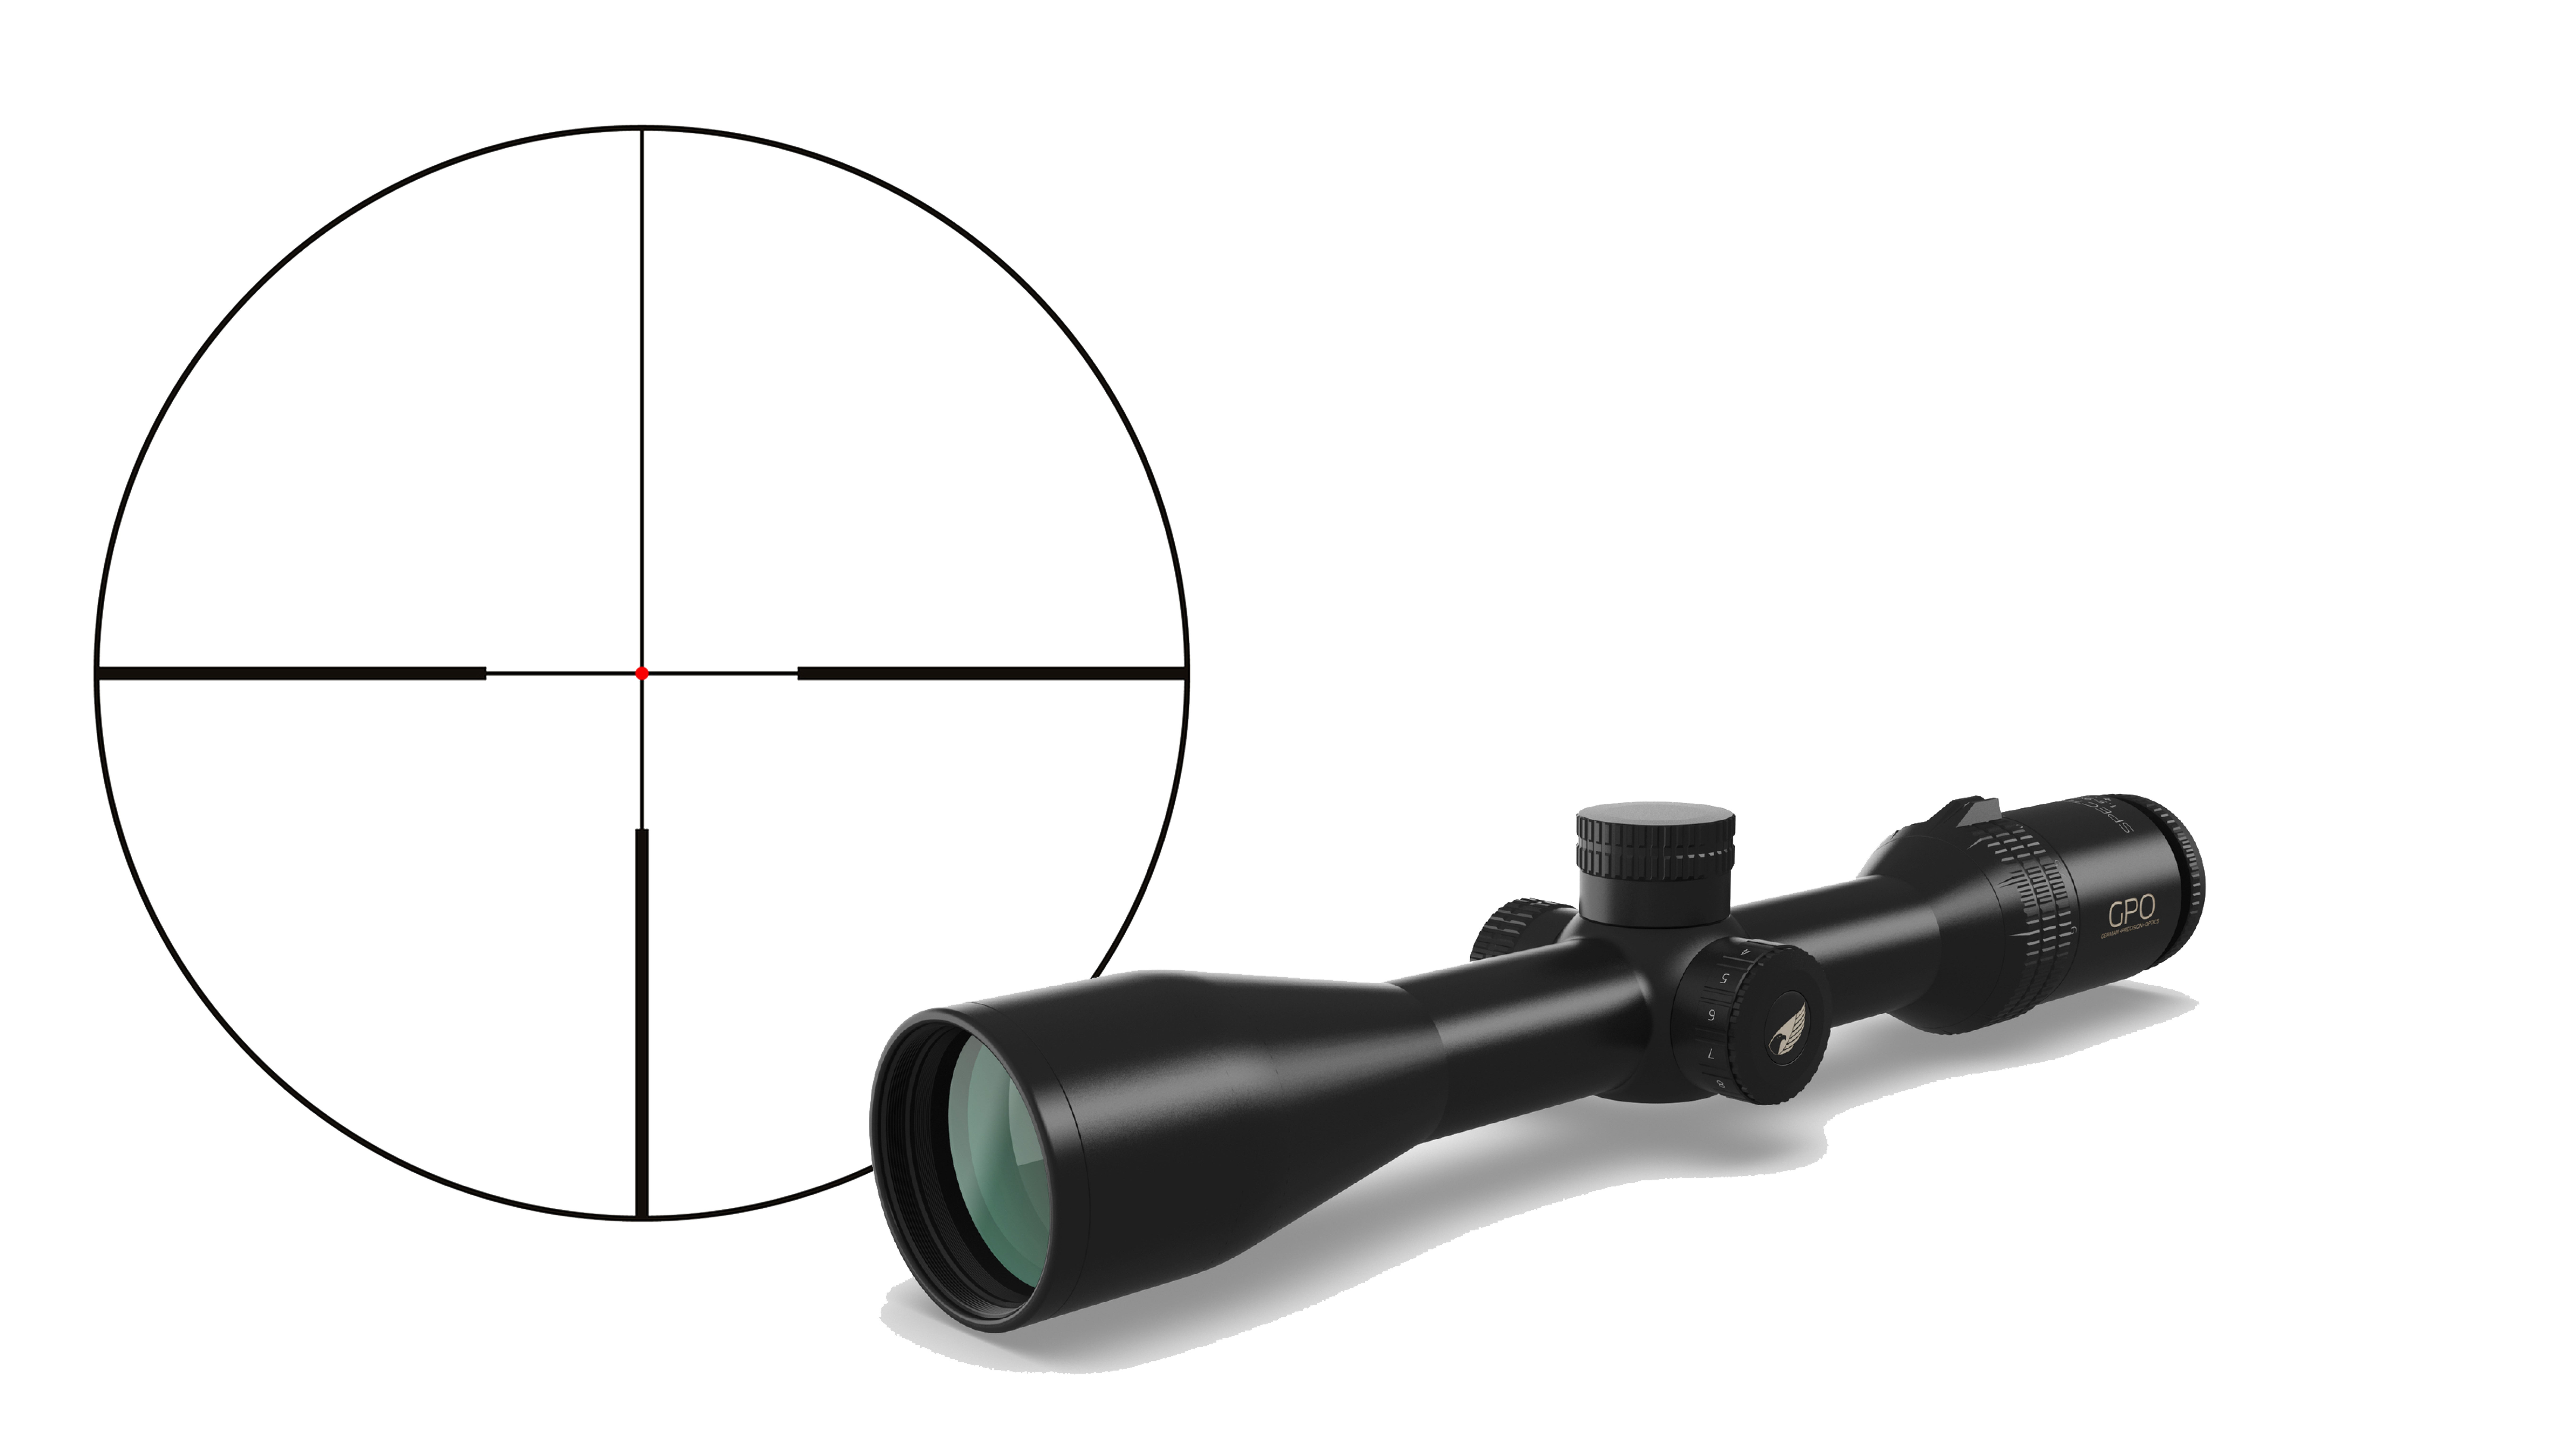 The GPO Spectra 1.5-8X44i with G4i reticle.